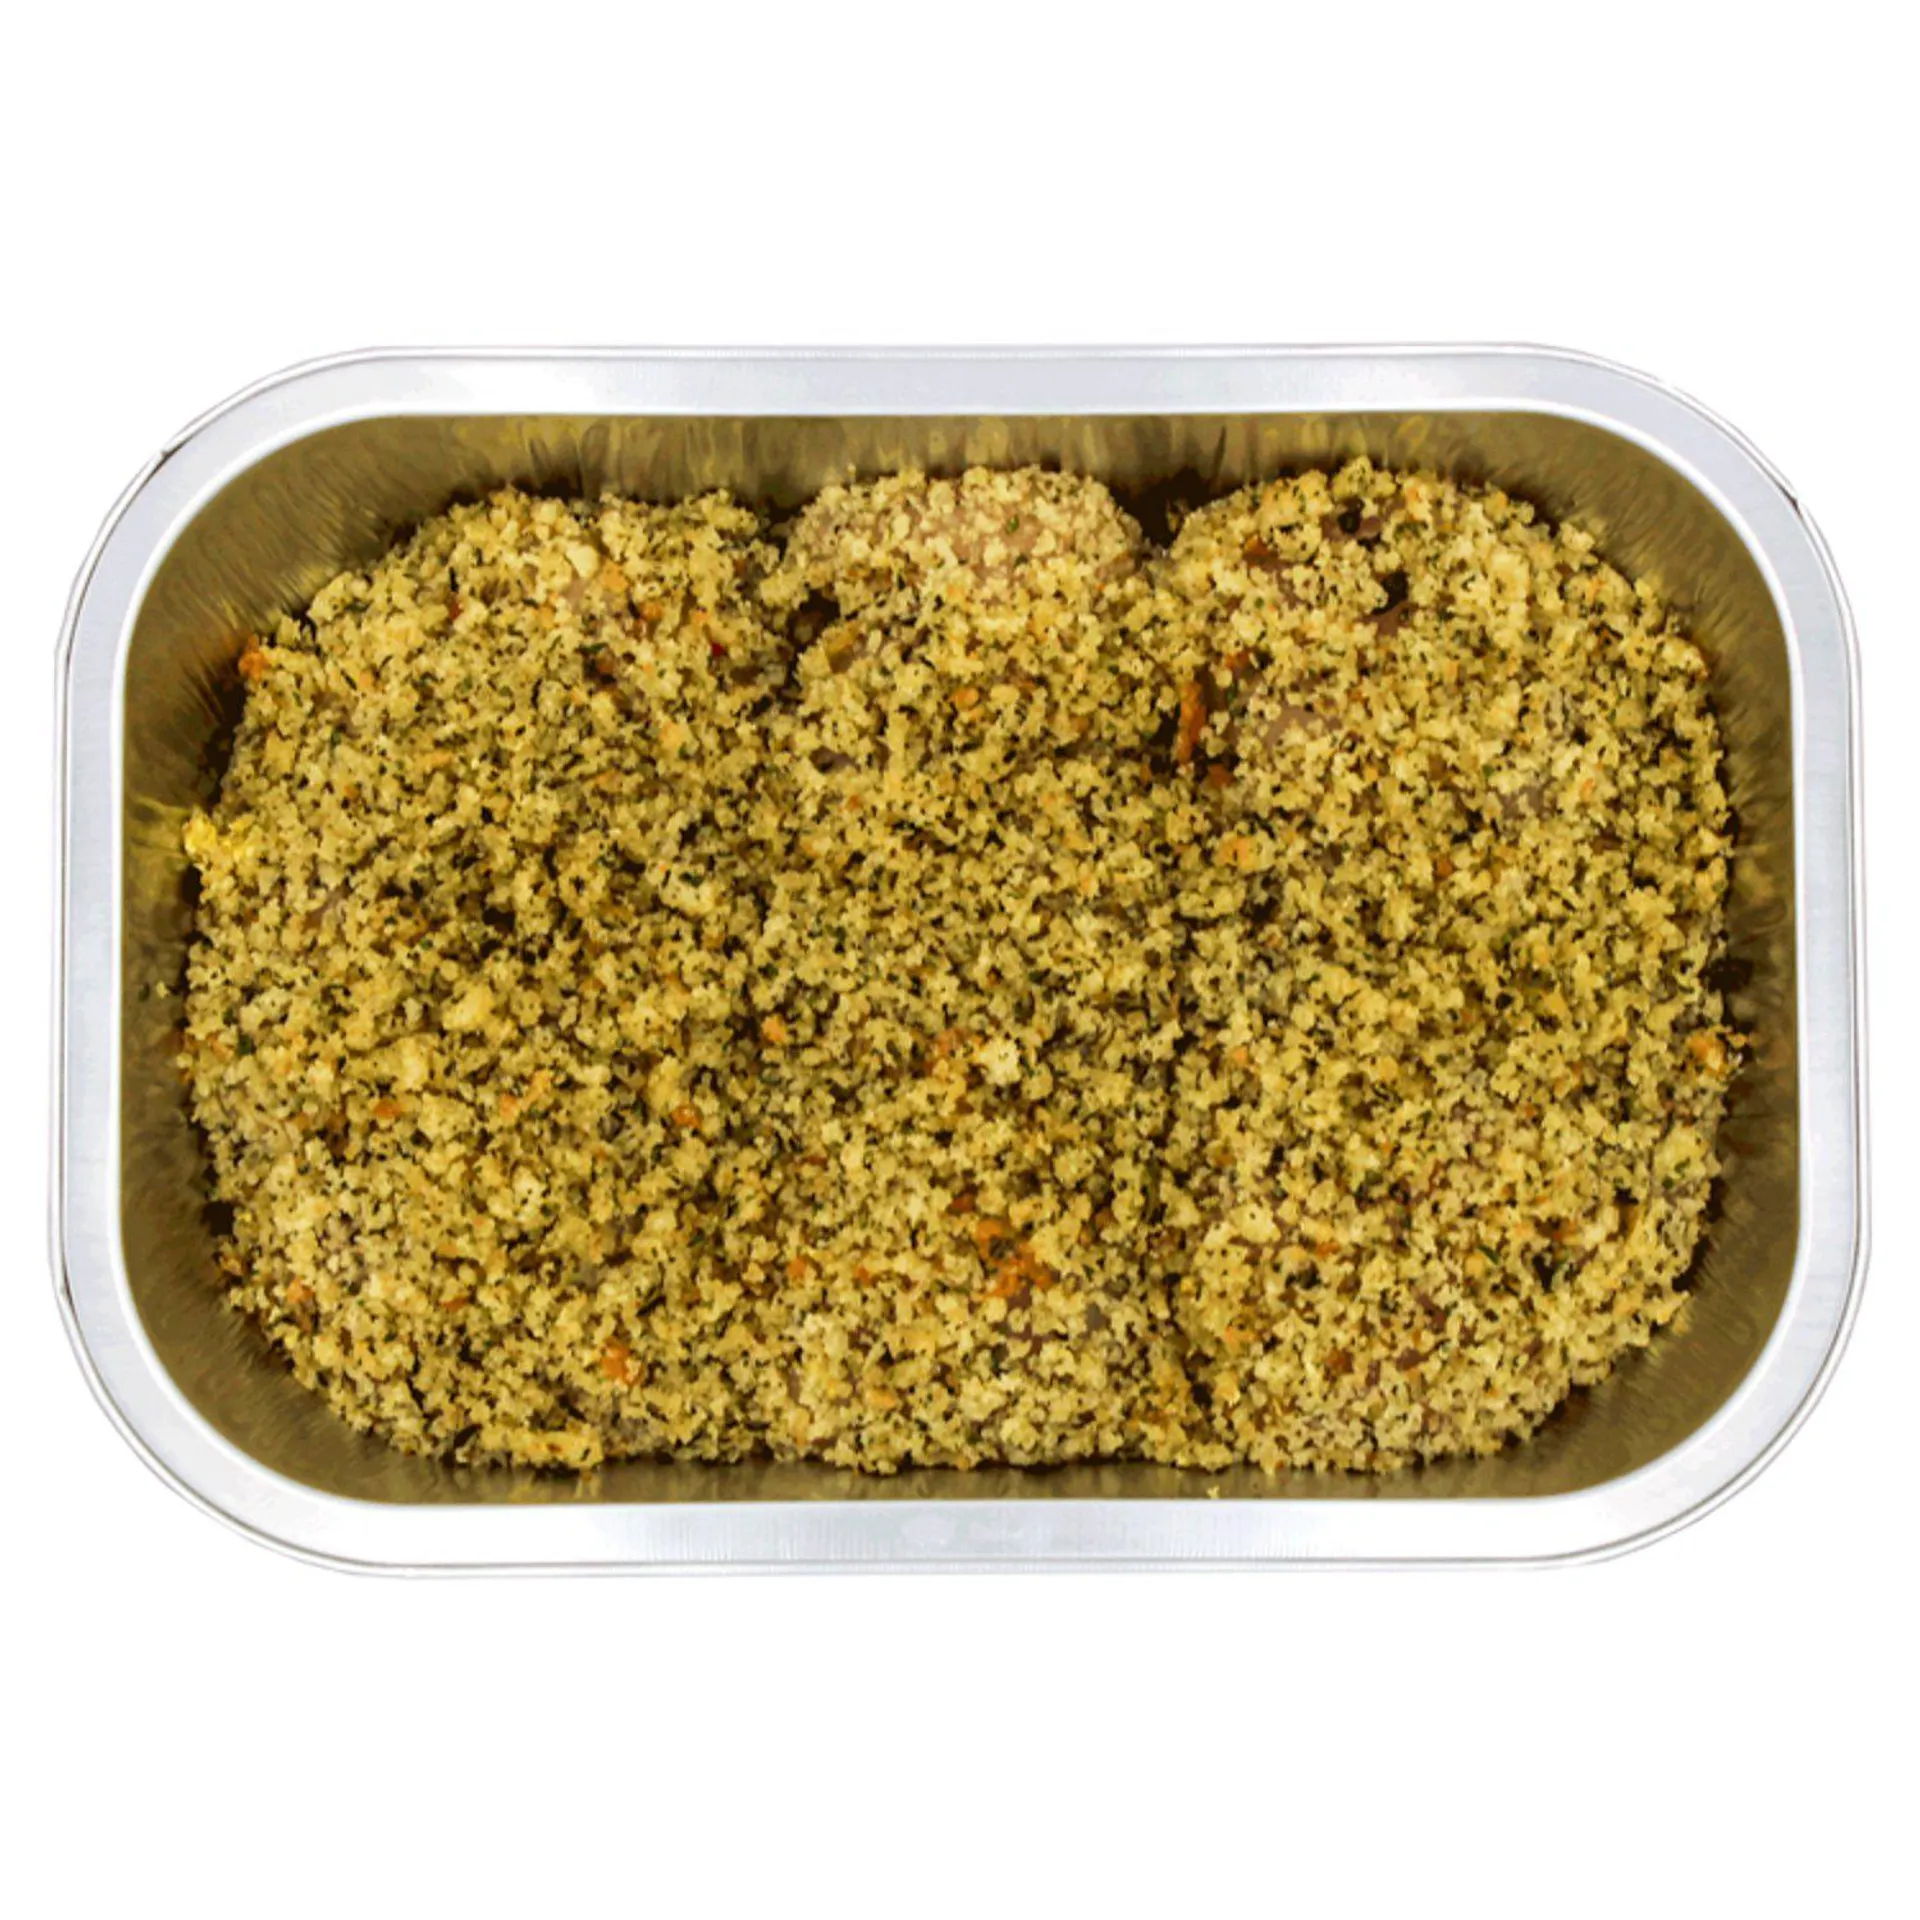 Prepared By Our Butcher Chicken Fillets with Garlic, Herb & Lemon Crumb (1 Piece)